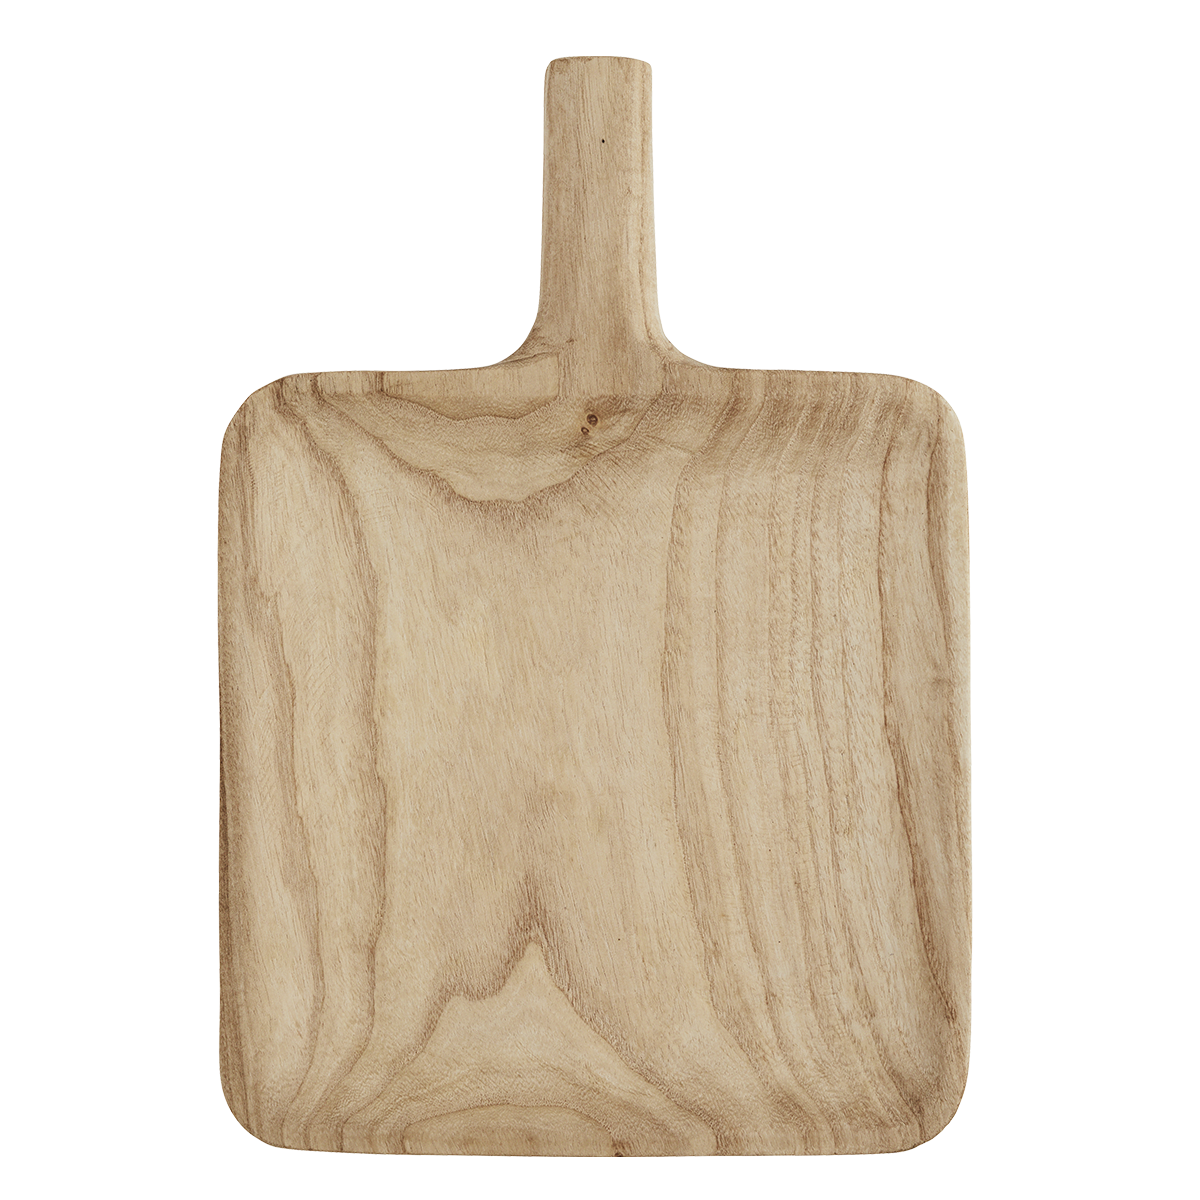 Square wooden serving dish w/ handle